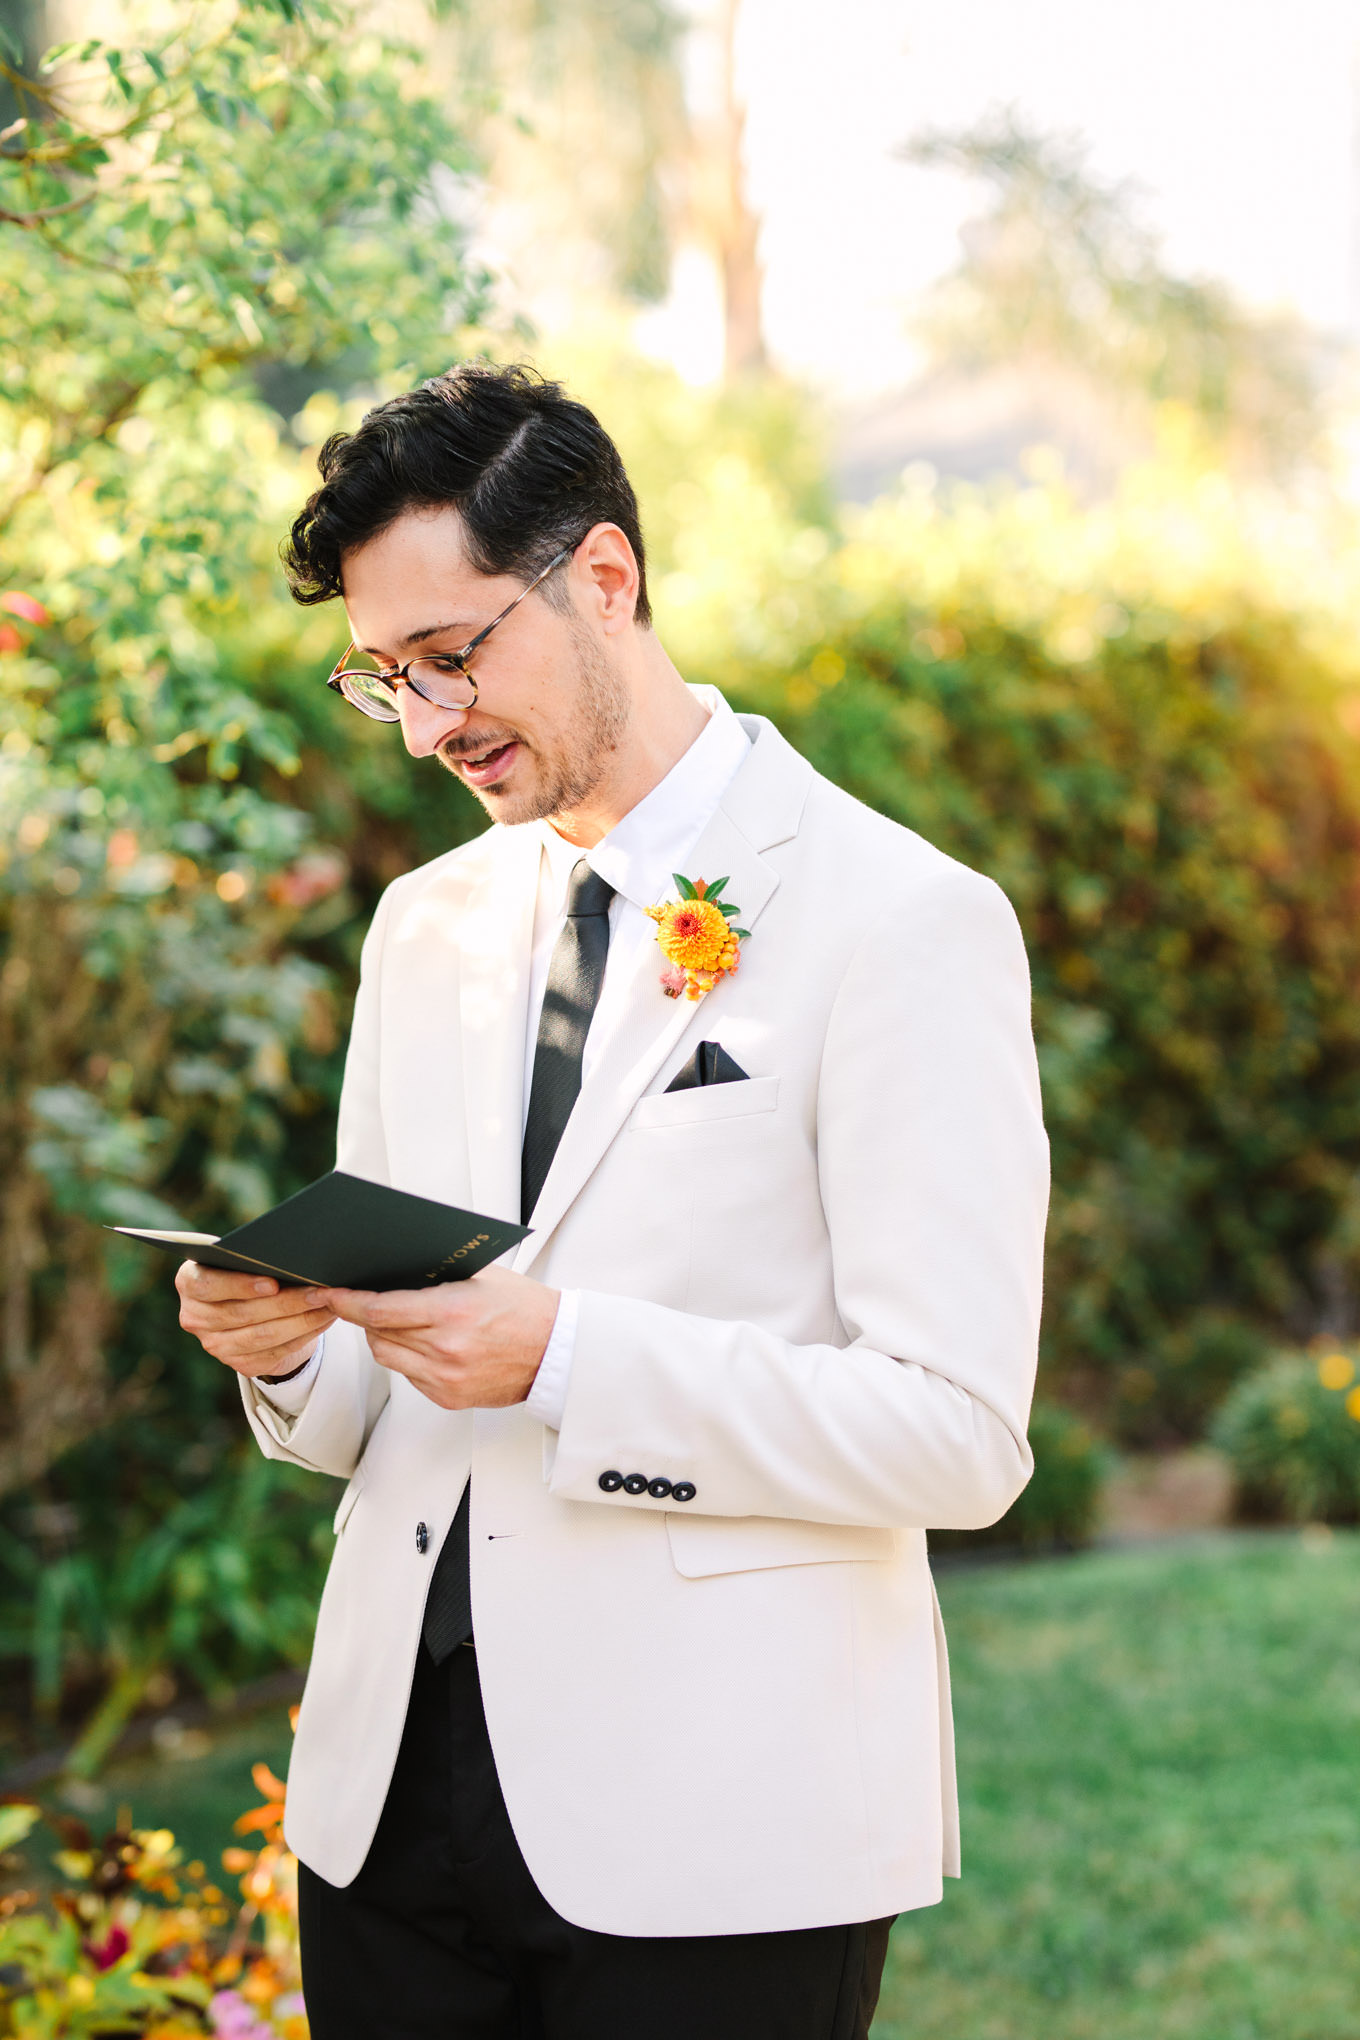 Groom portrait reading his vows | Vibrant backyard micro wedding featured on Green Wedding Shoes | Colorful LA wedding photography | #losangeleswedding #backyardwedding #microwedding #laweddingphotographer Source: Mary Costa Photography | Los Angeles